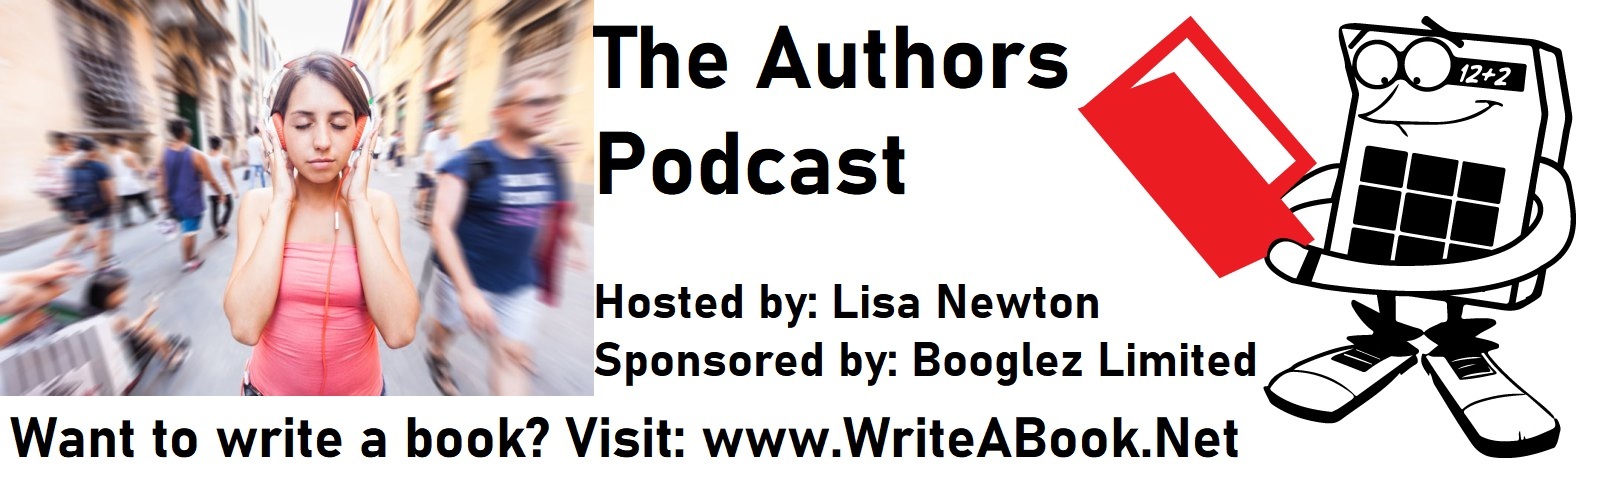 The Authors Podcast